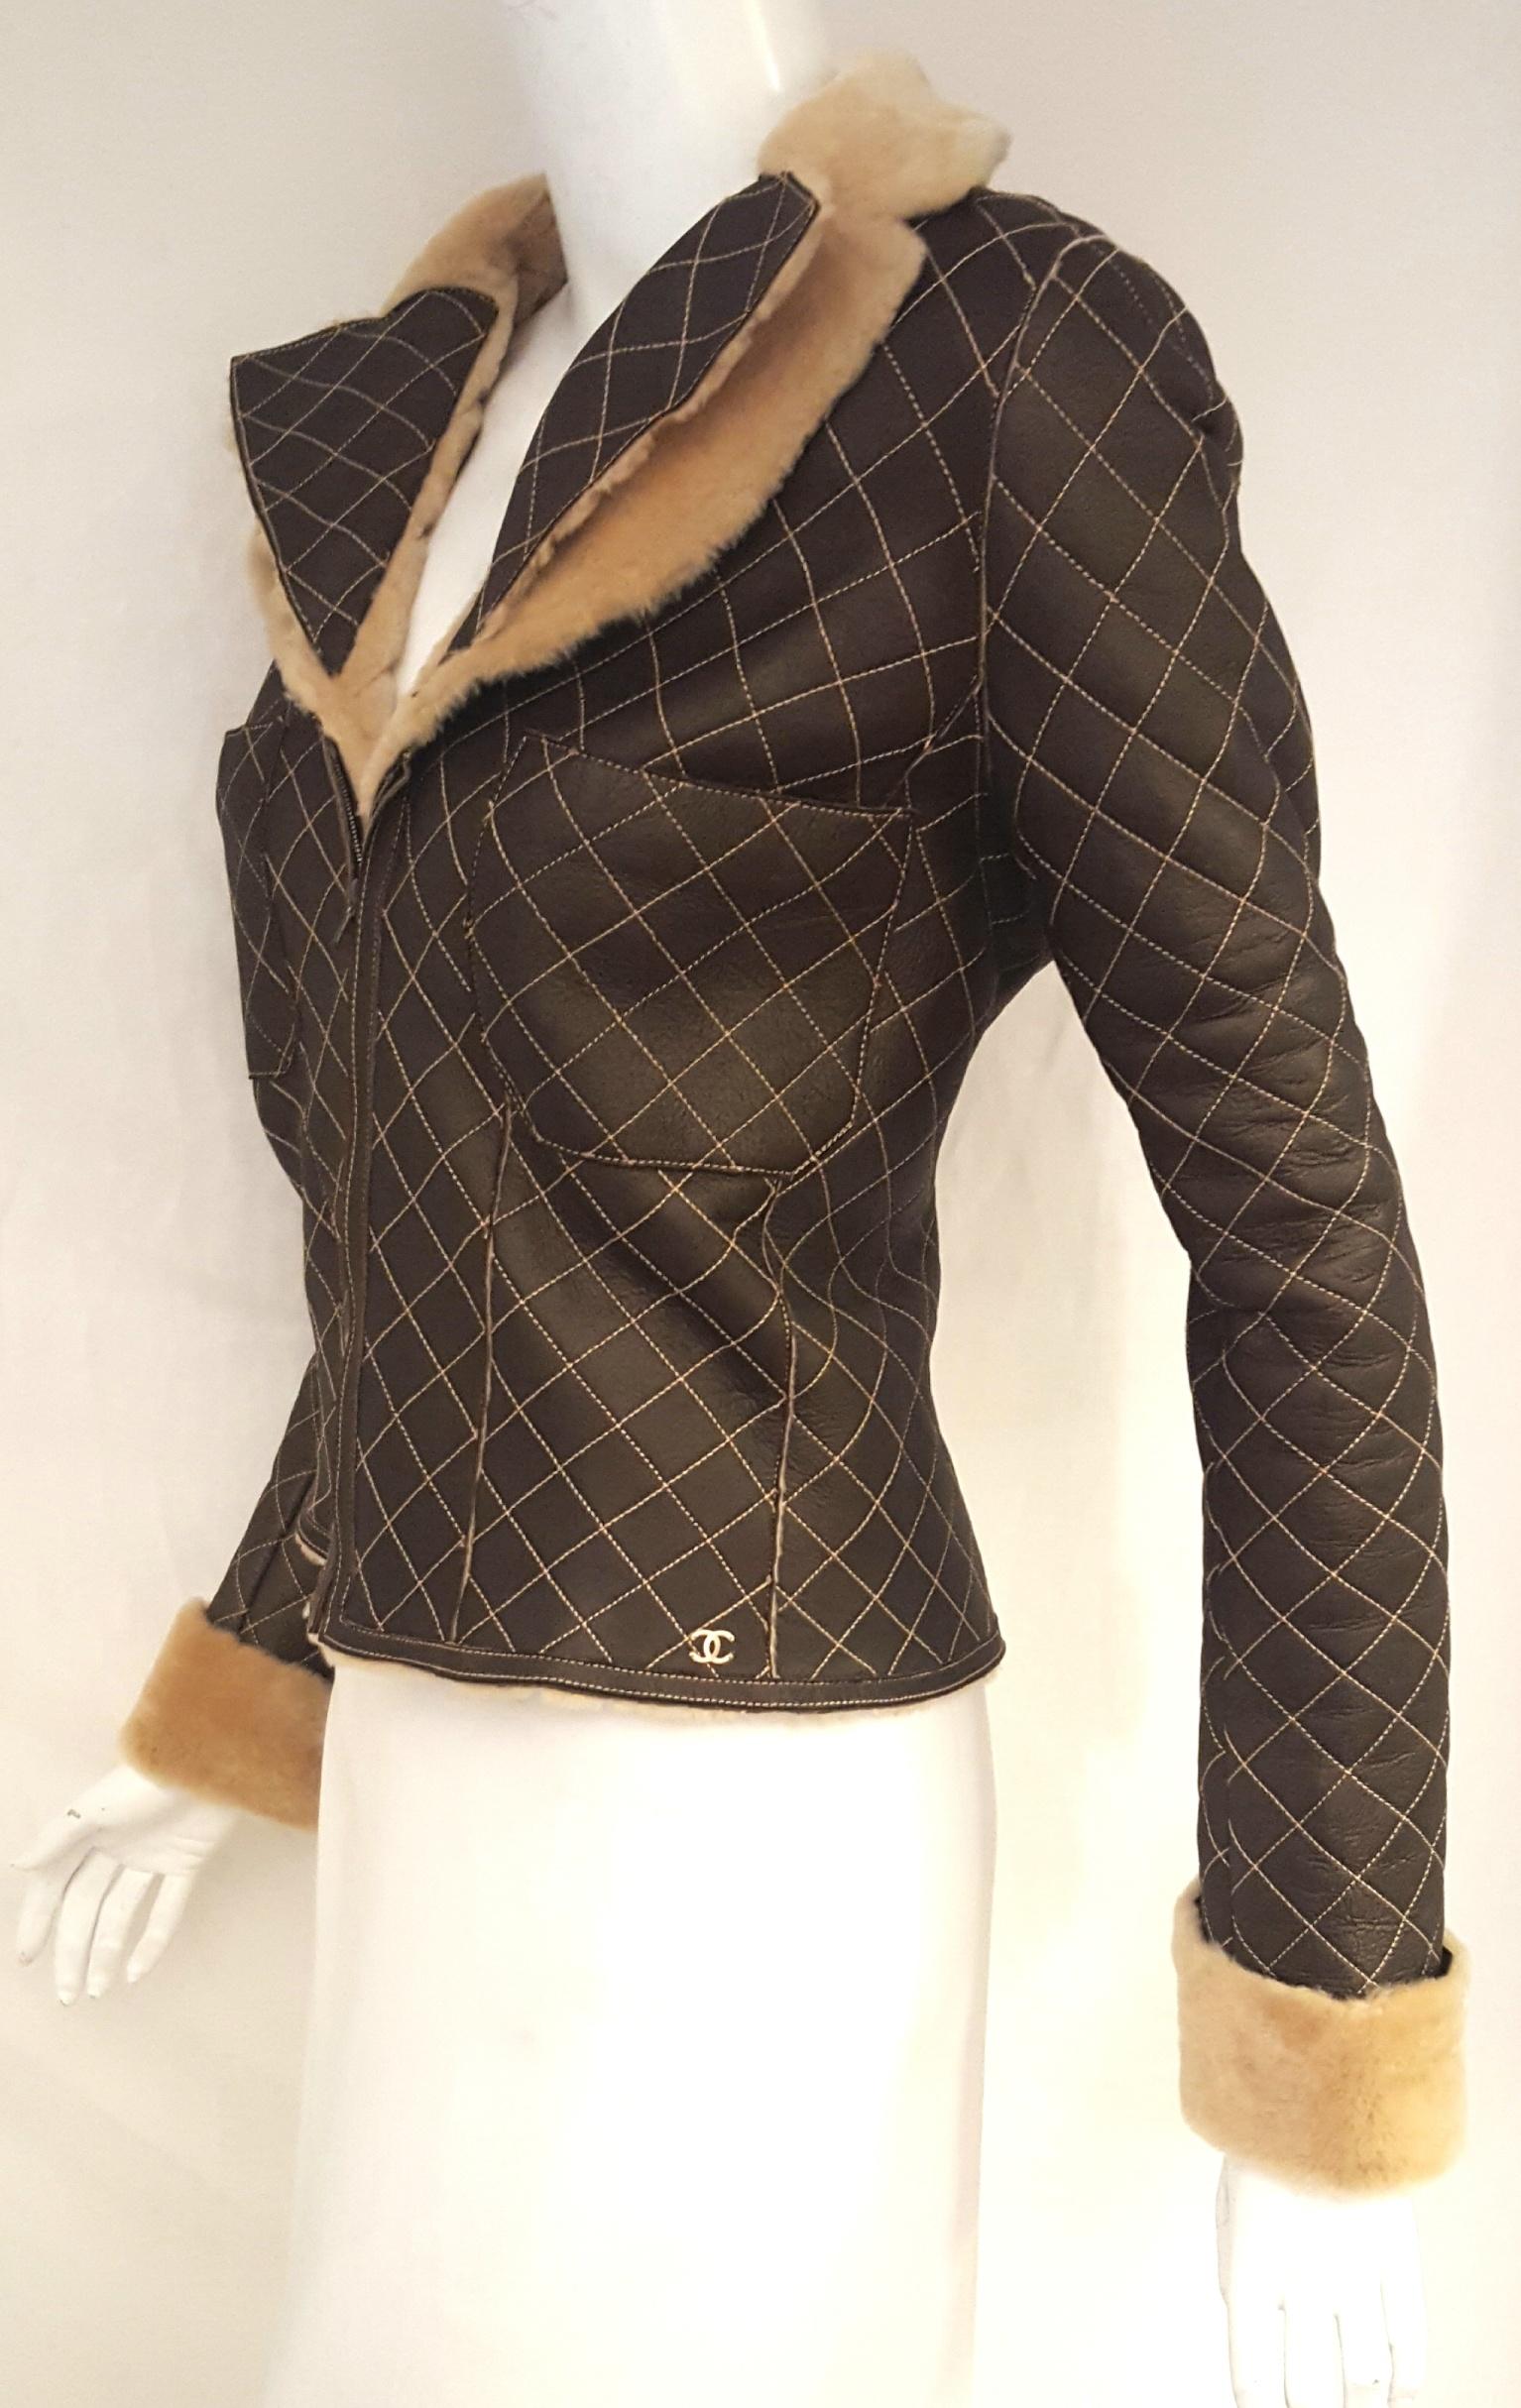 Chanel slightly iridescent brown quilted lambskin shearling crop jacket from the fall 2004 collection features a notch collar and turn up cuffs.  This jacket has the signature Chanel diamond design on both the exterior and interior, the same design